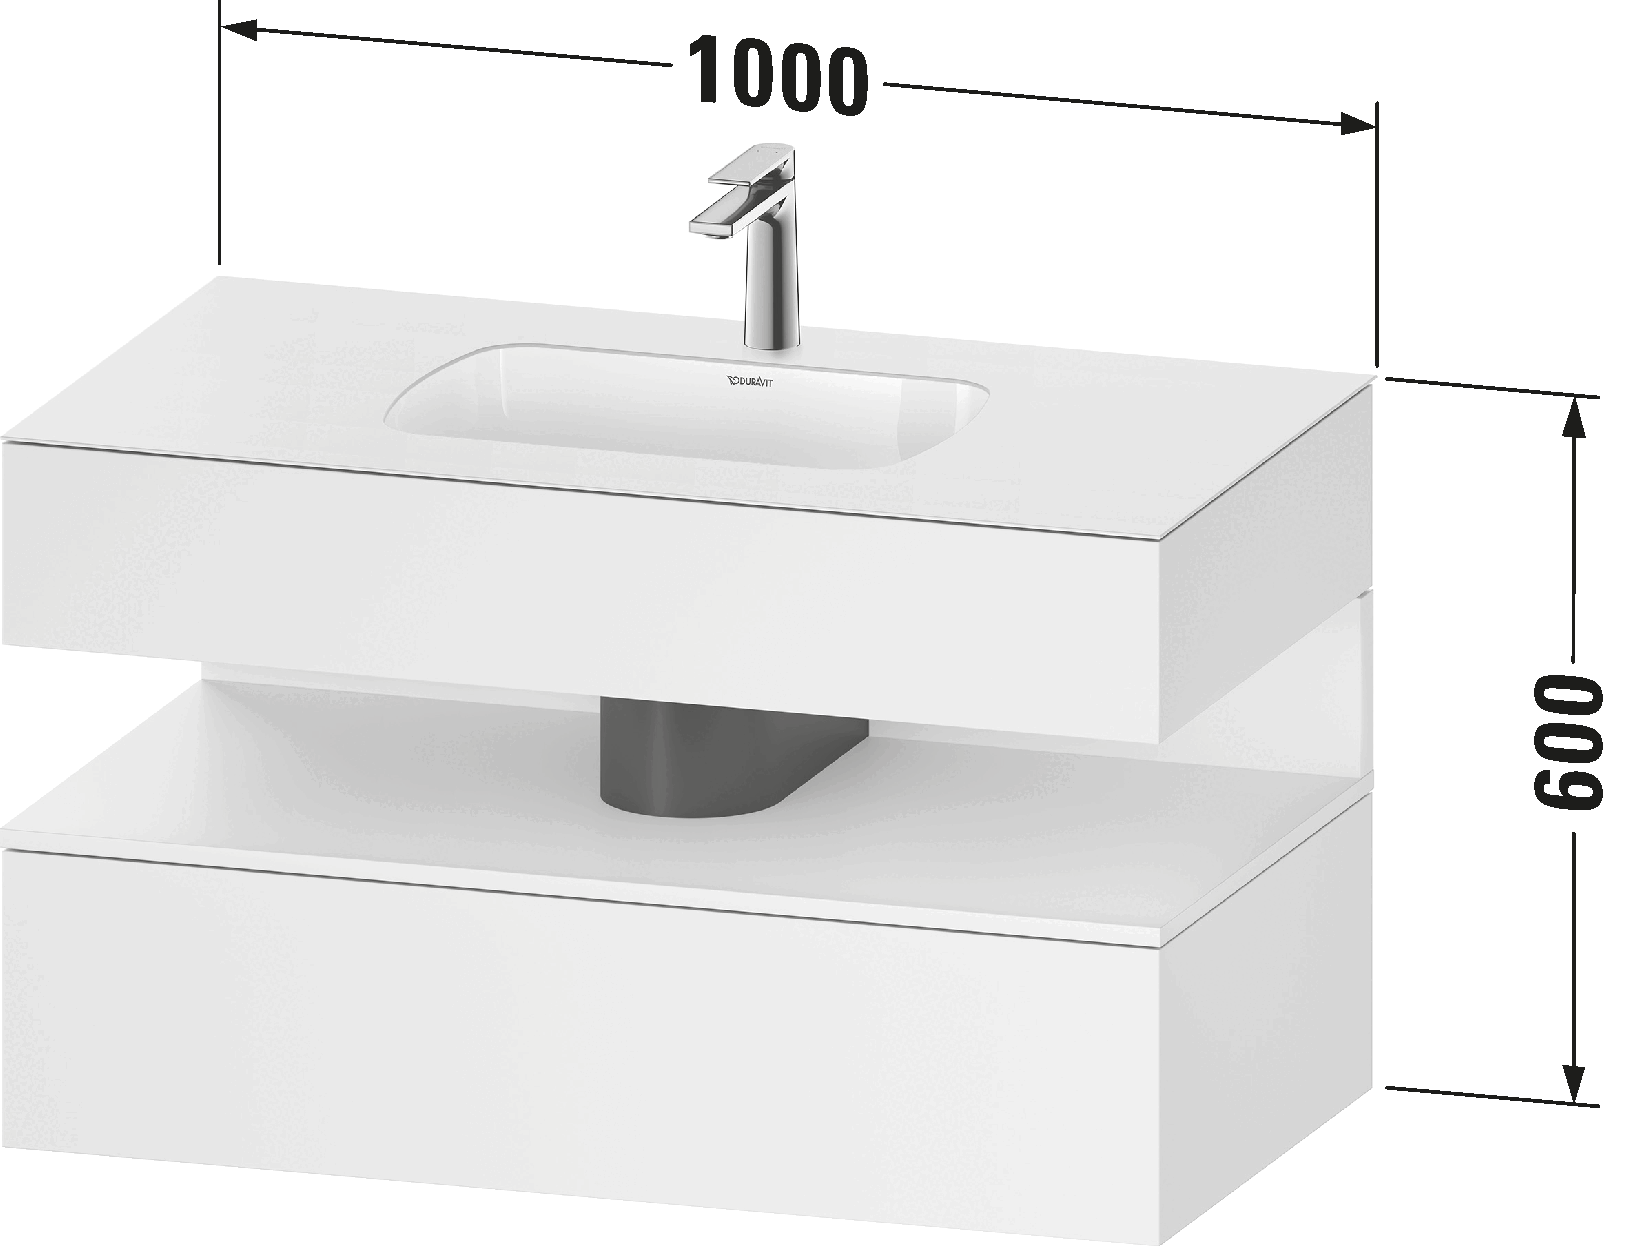 Built-in basin with console vanity unit, QA4786